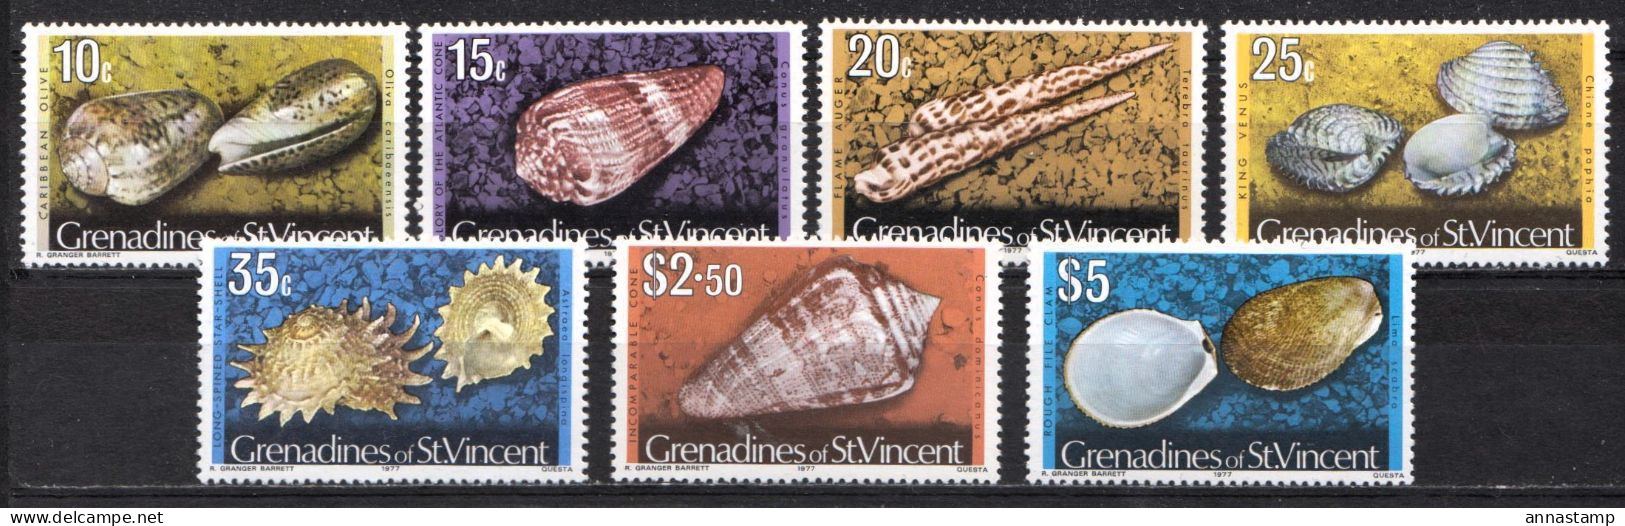 Grenadines Of St Vincent MNH Set, With Imprint Year 1977 - Coquillages